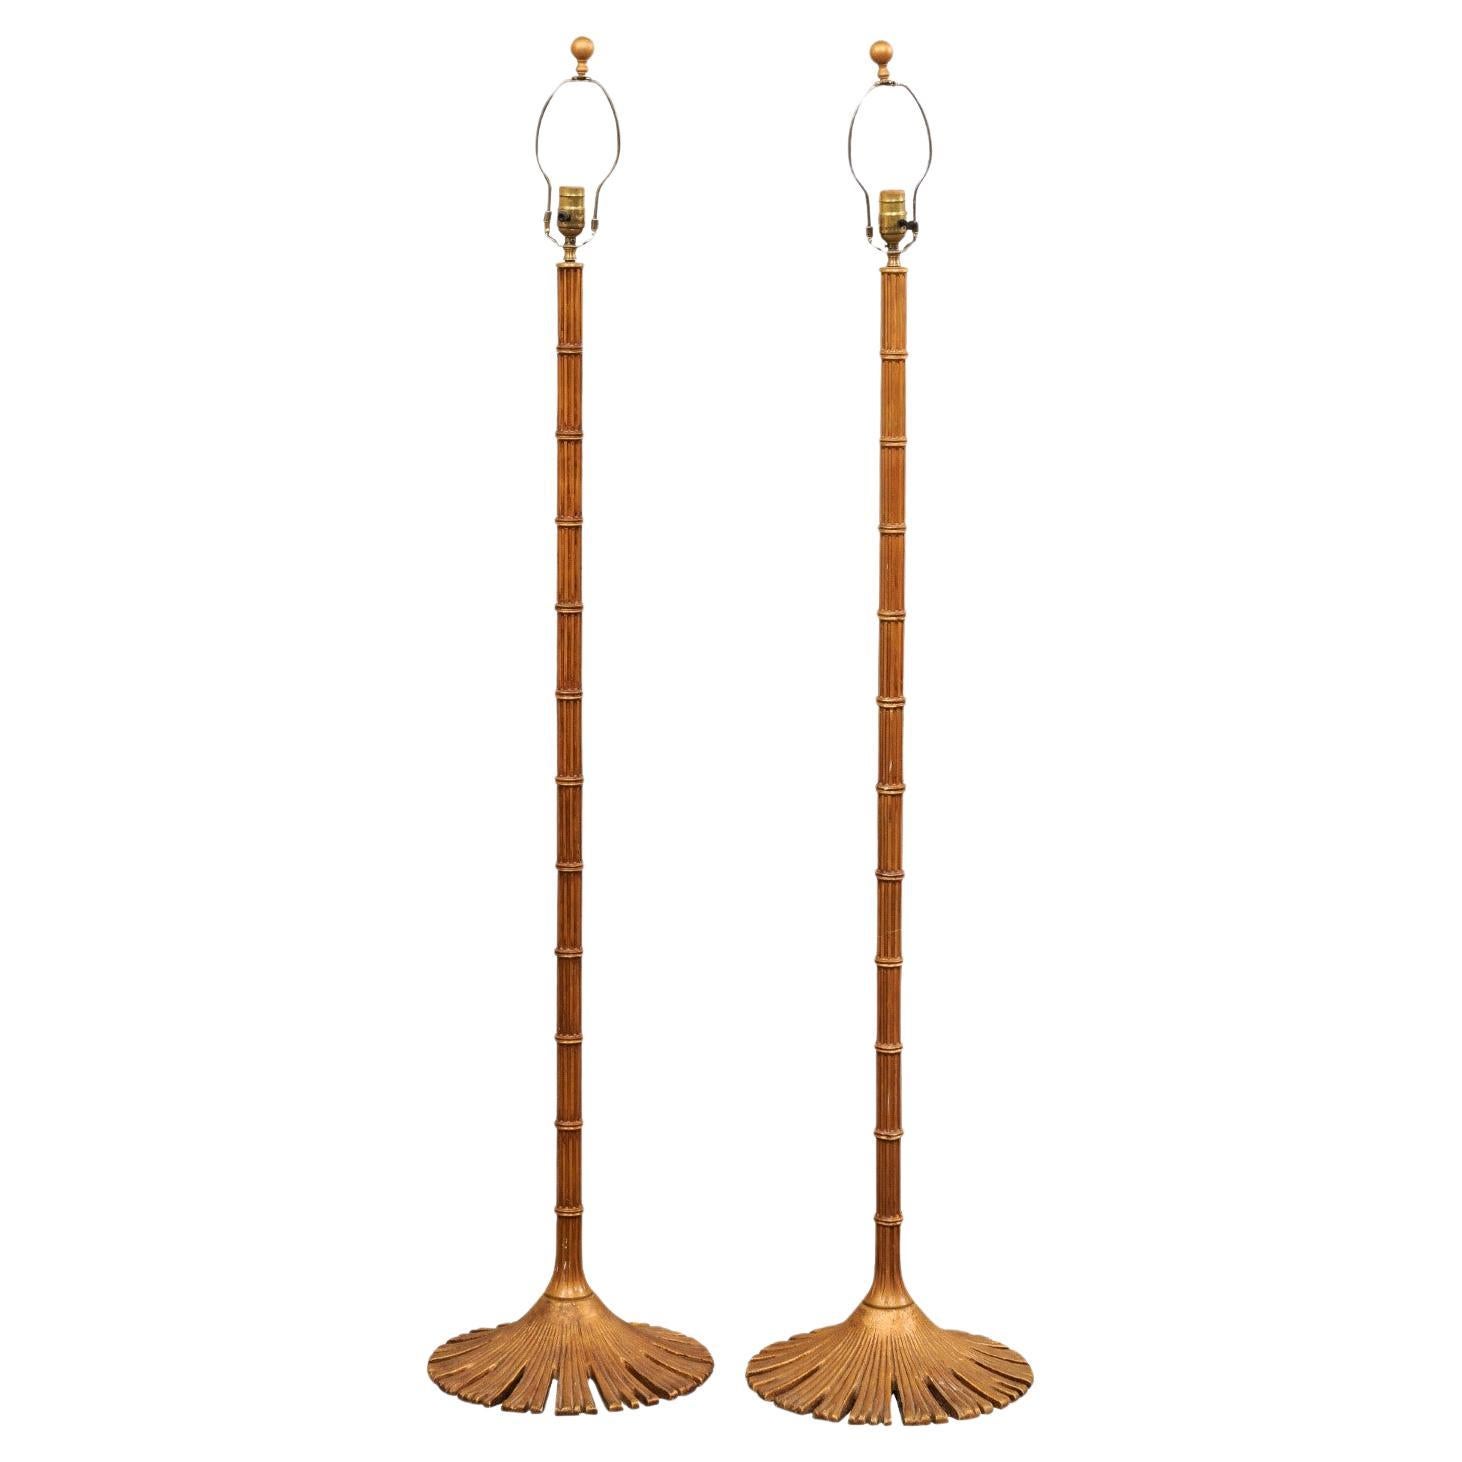 A Brass Pair of Chapman Bamboo Style Floor Lamps, Rewired for US For Sale